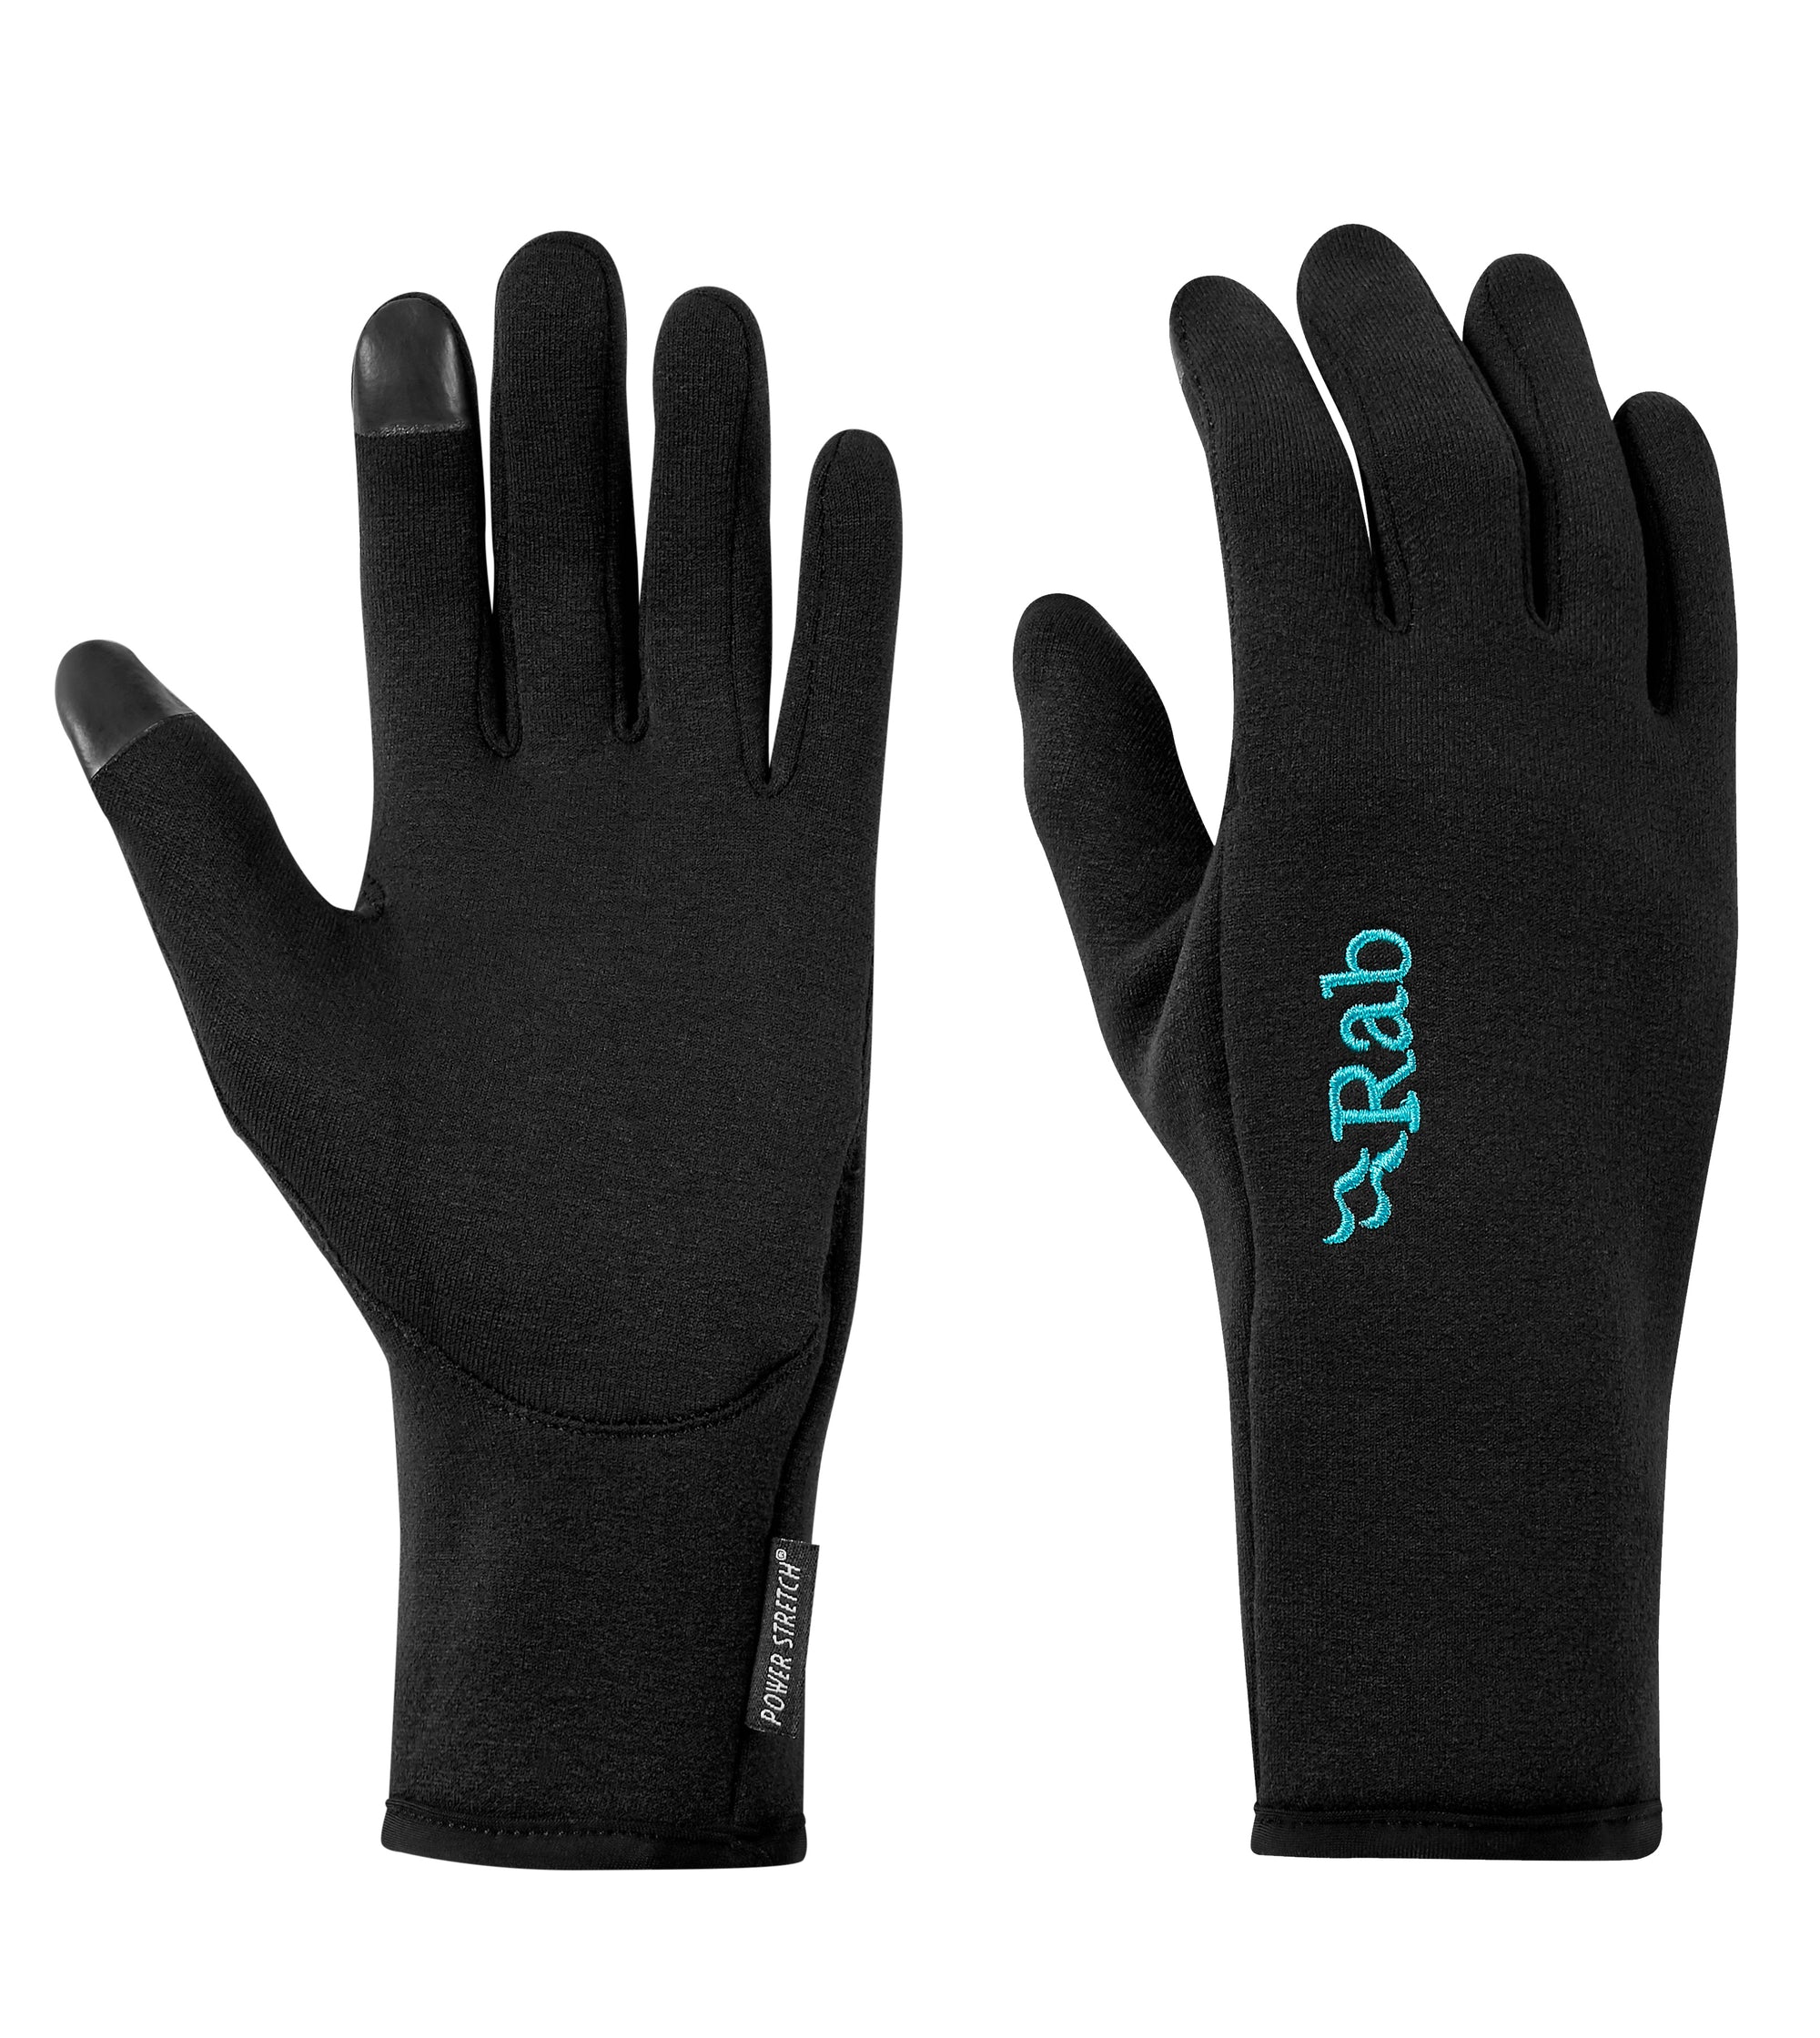 Rab Women's Power Stretch Contact Glove